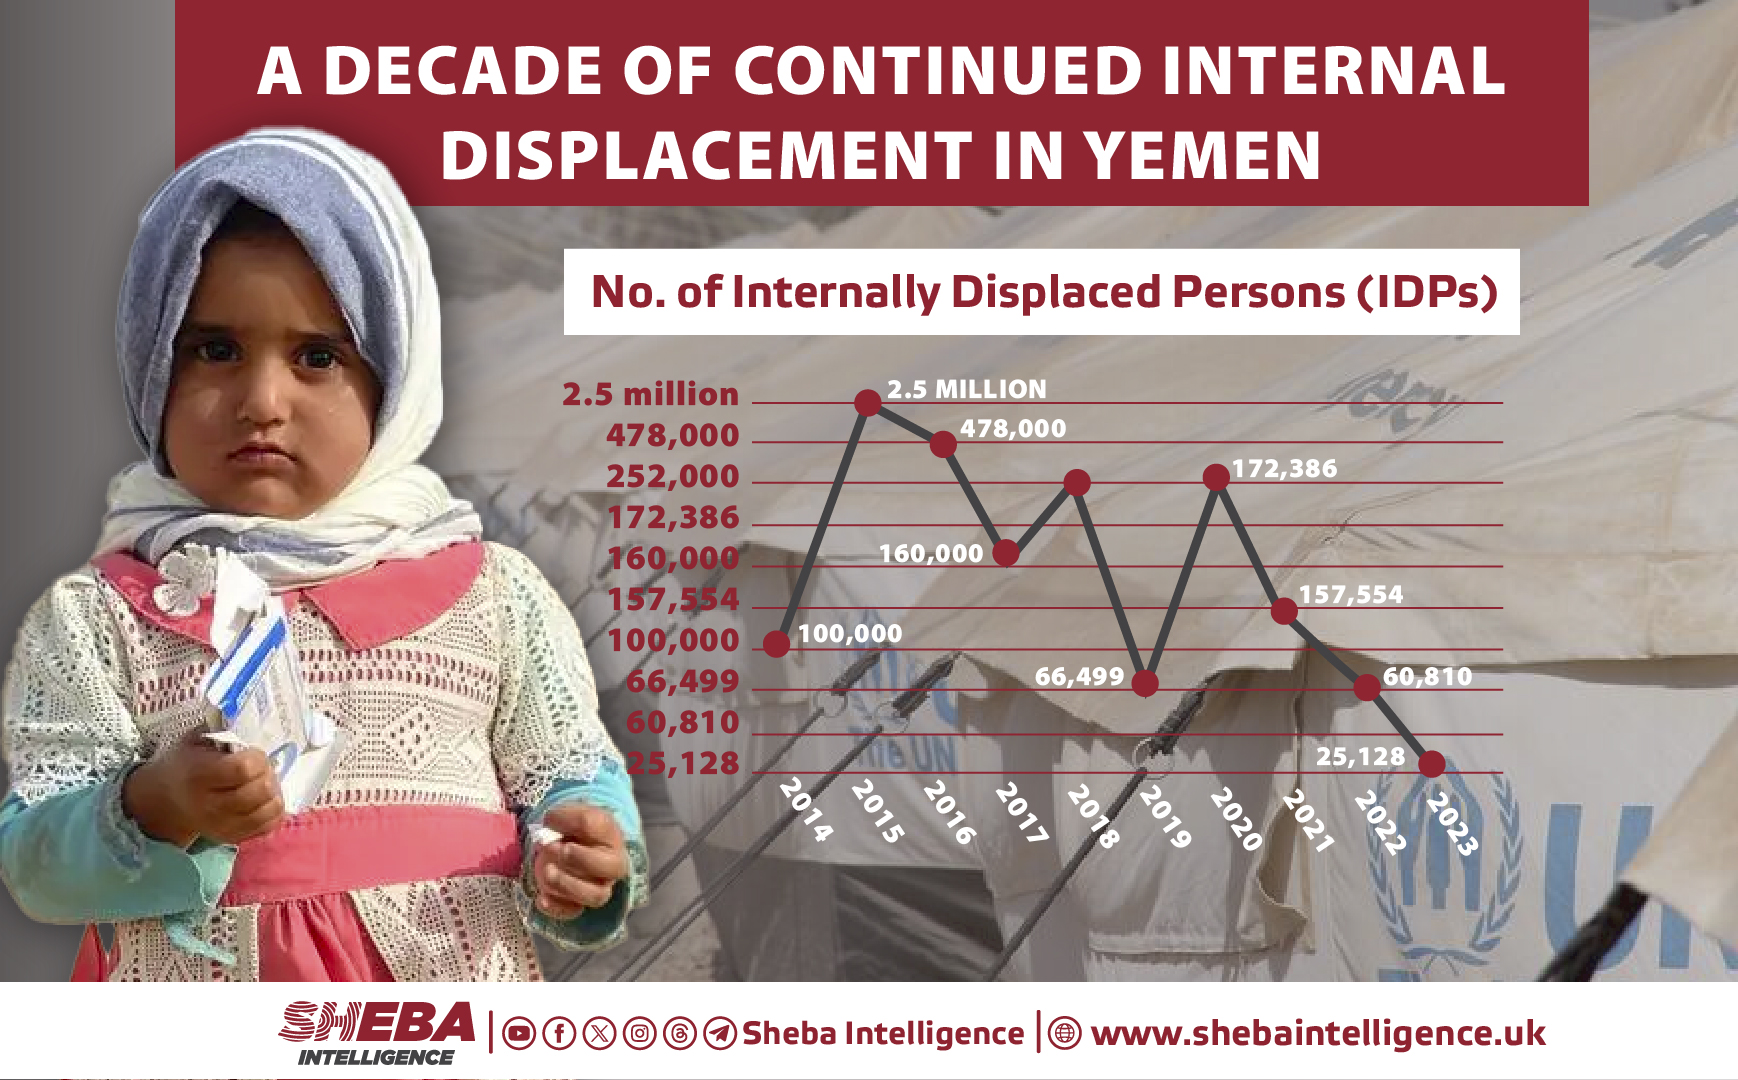 A Decade of Continued Internal Displacement in Yemen